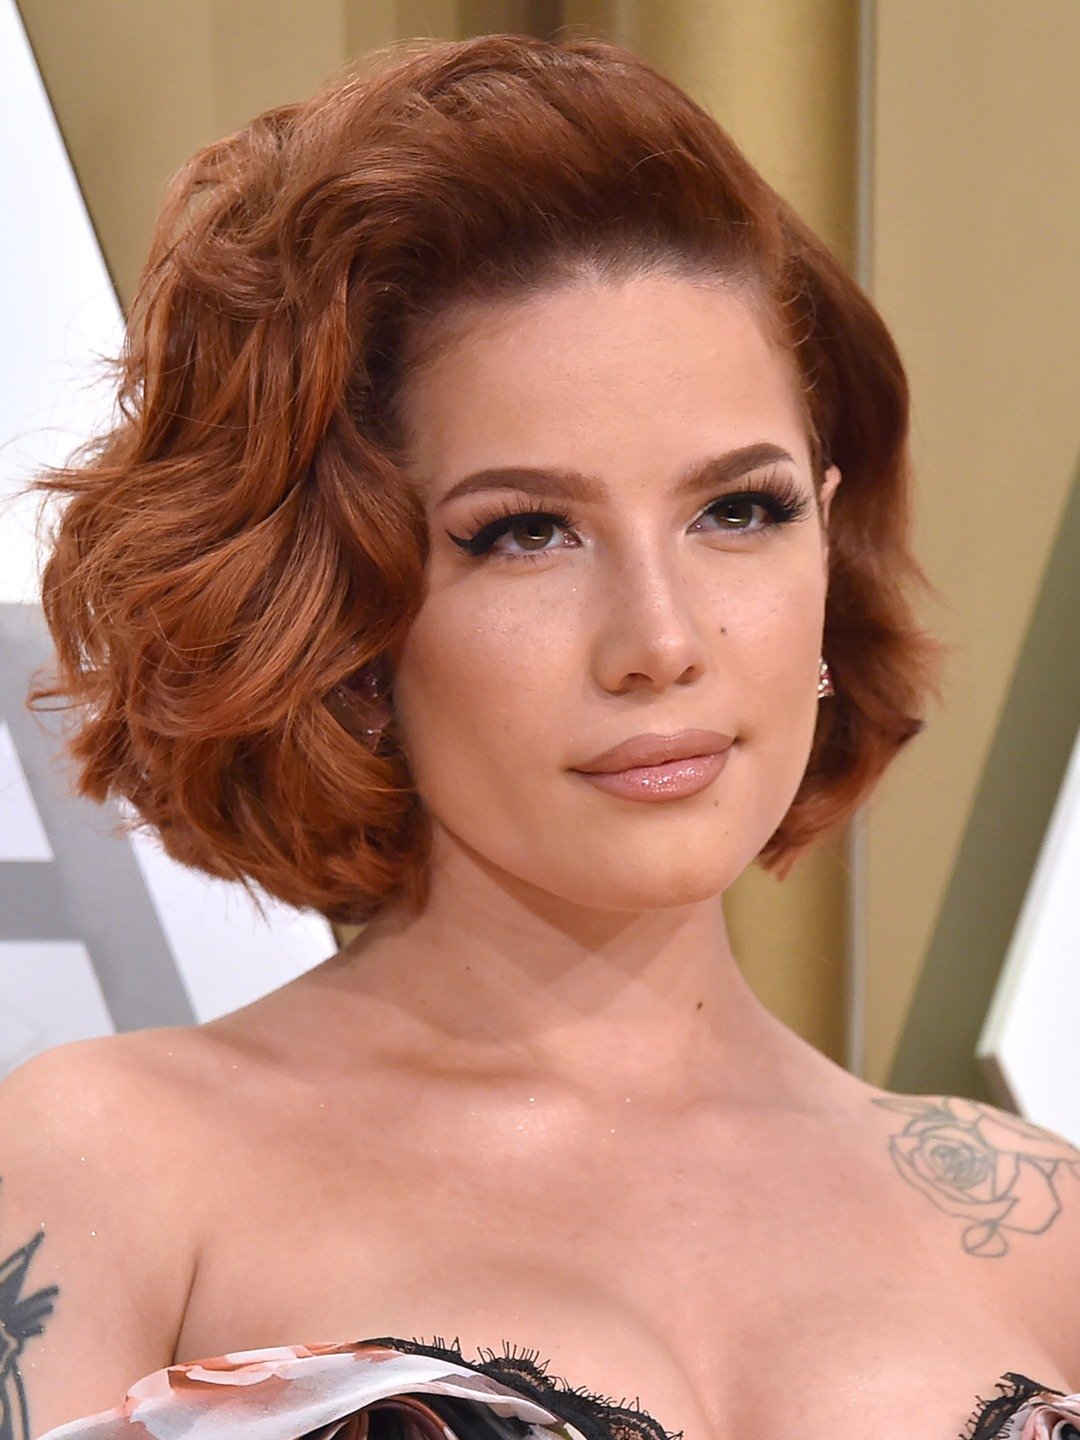 Celebs who slept with common people - halsey singer